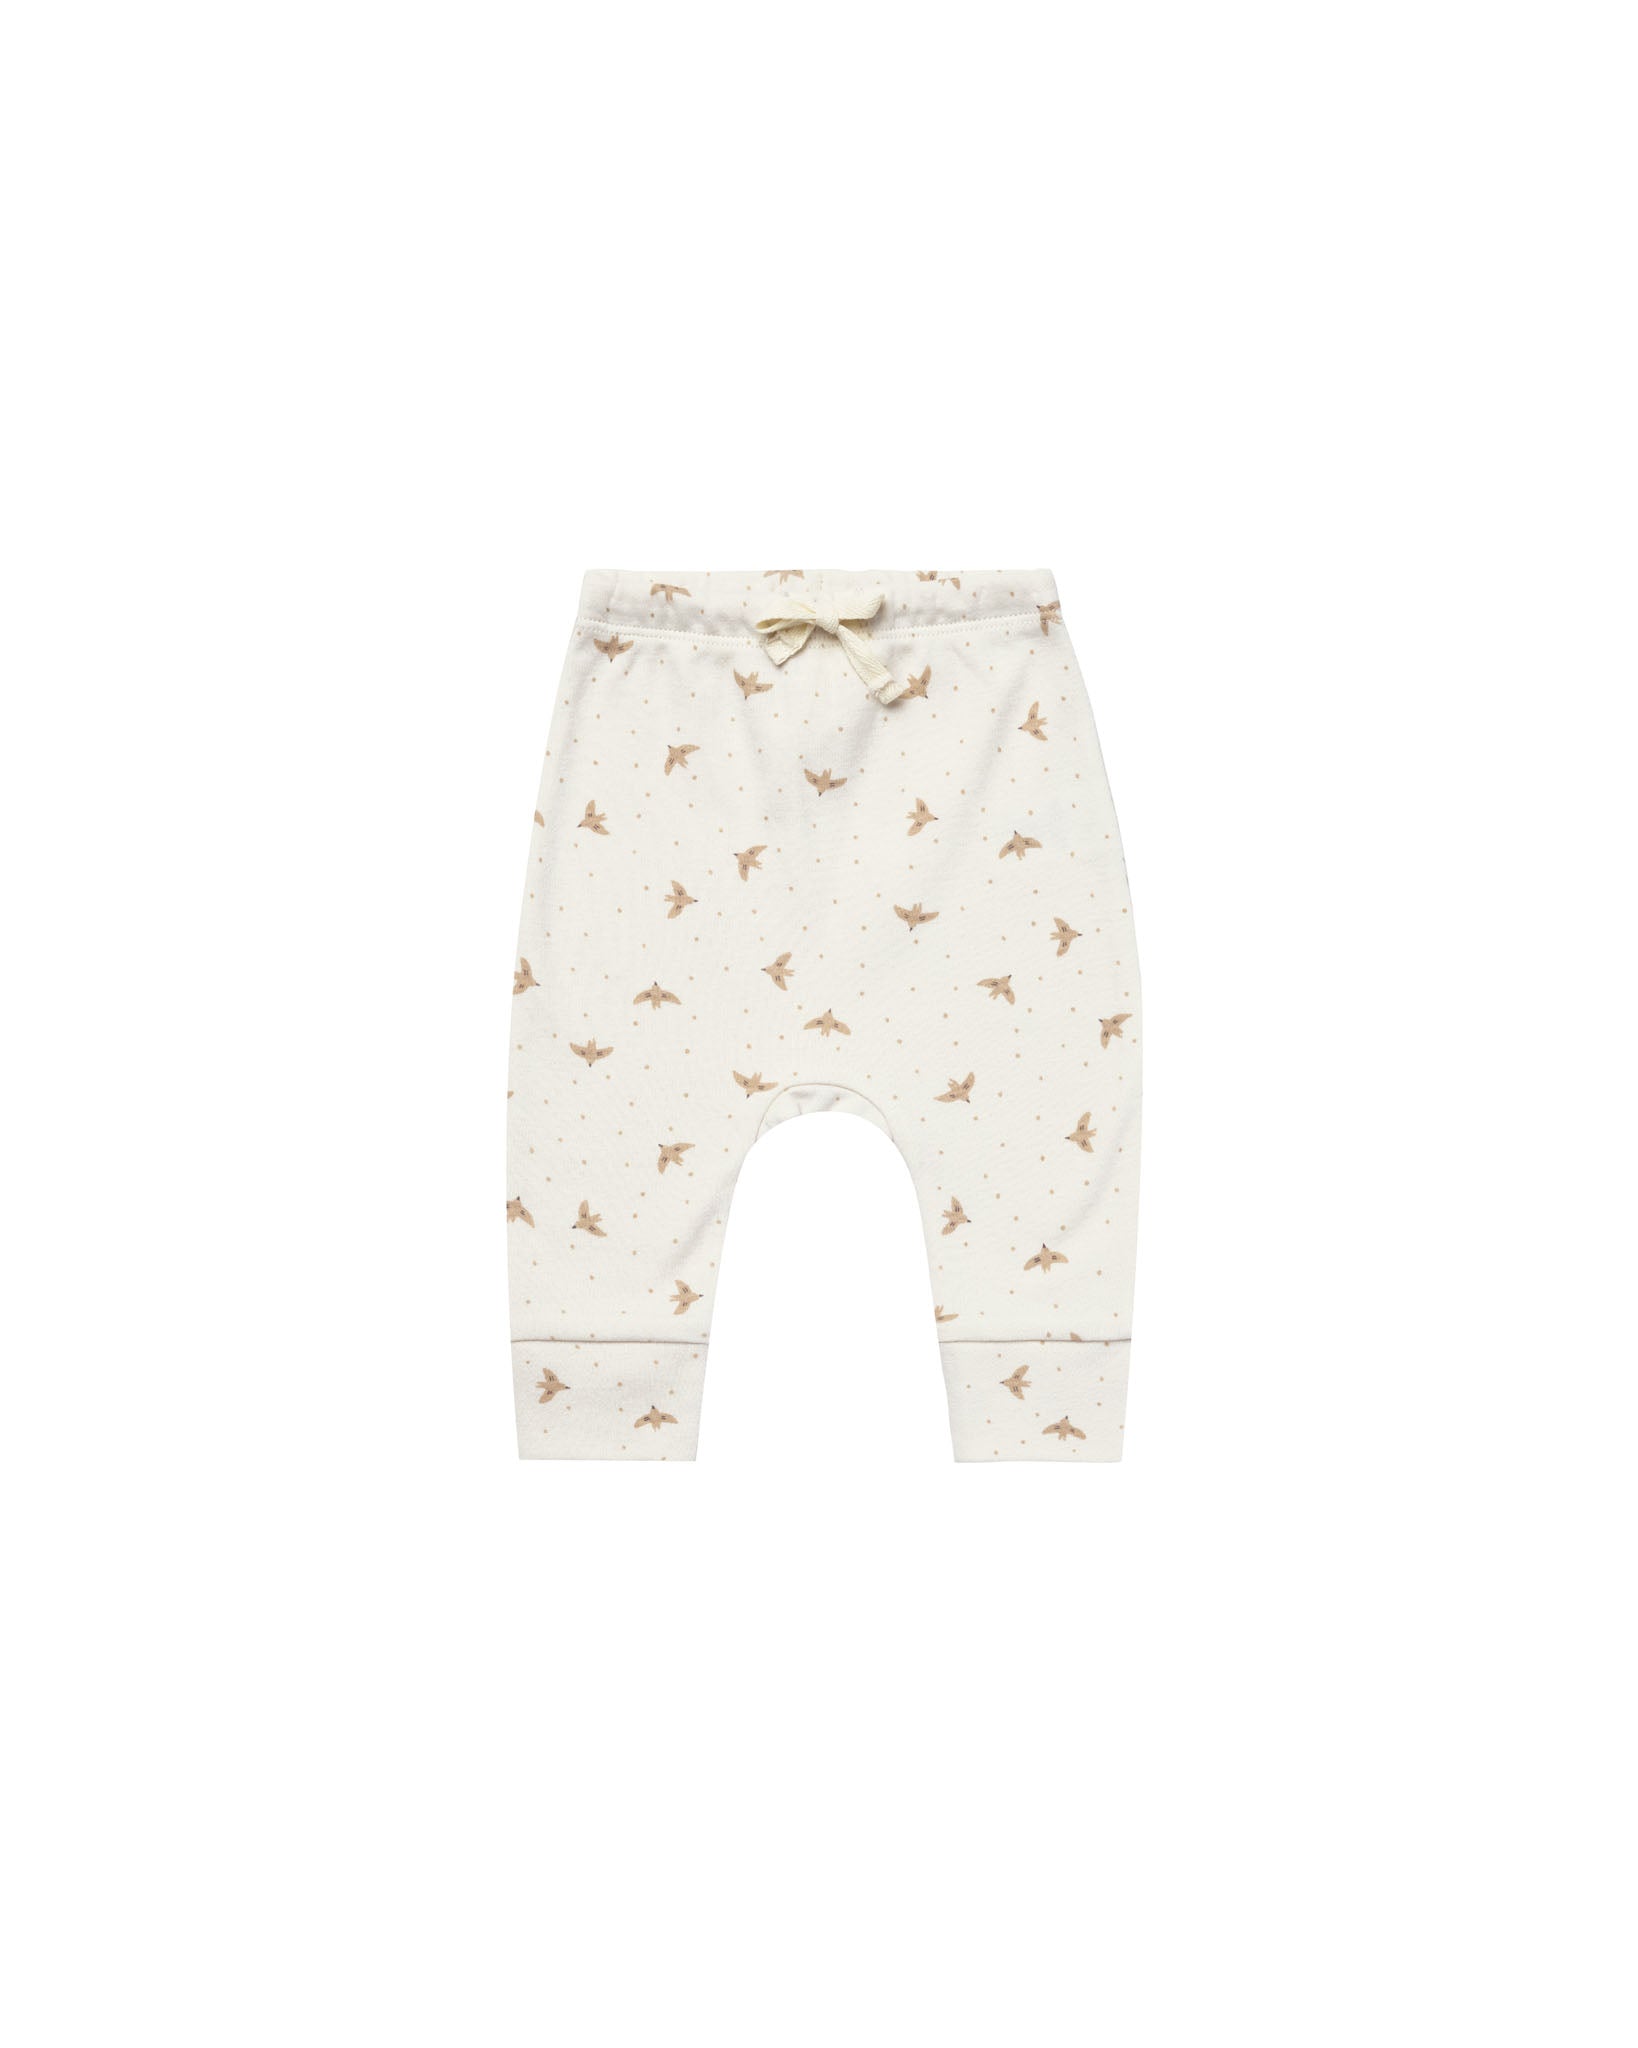 QUINCY MAE DRAWSTRING PANT / DOVES